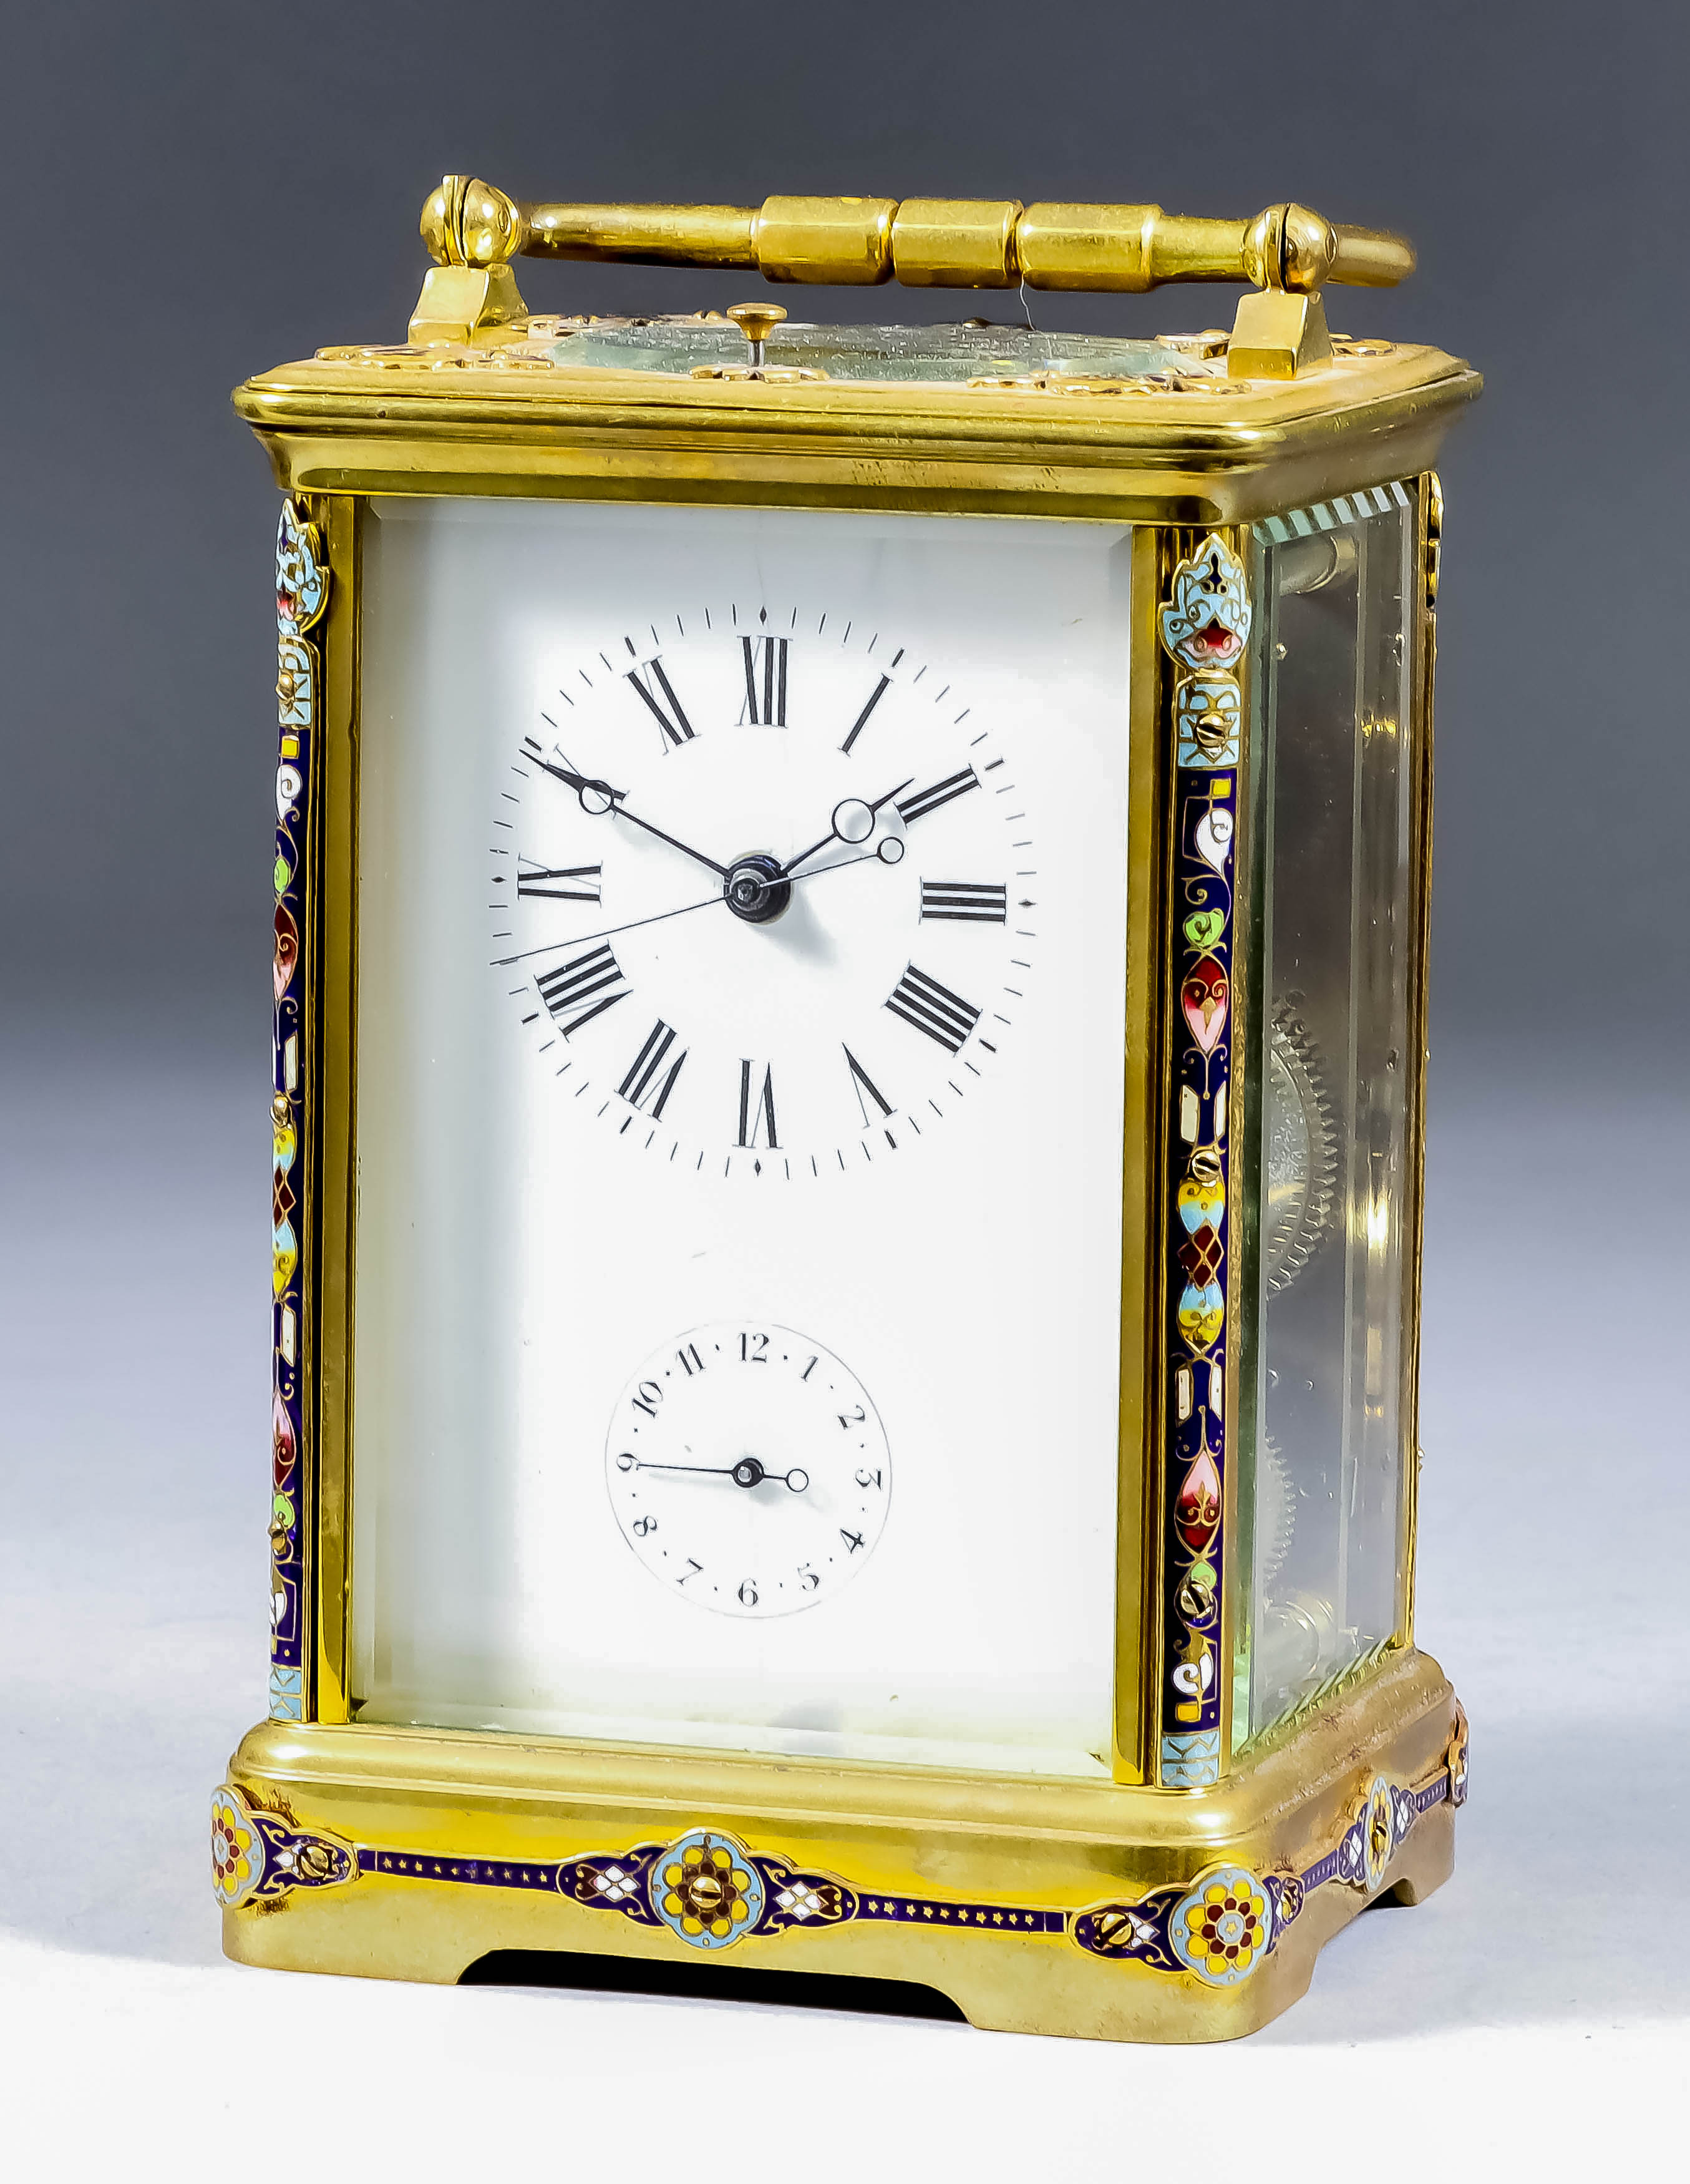 A Chinese Gilt Brass and Enamel Mounted Carriage Clock, Late 19th Century, the white enamel dial